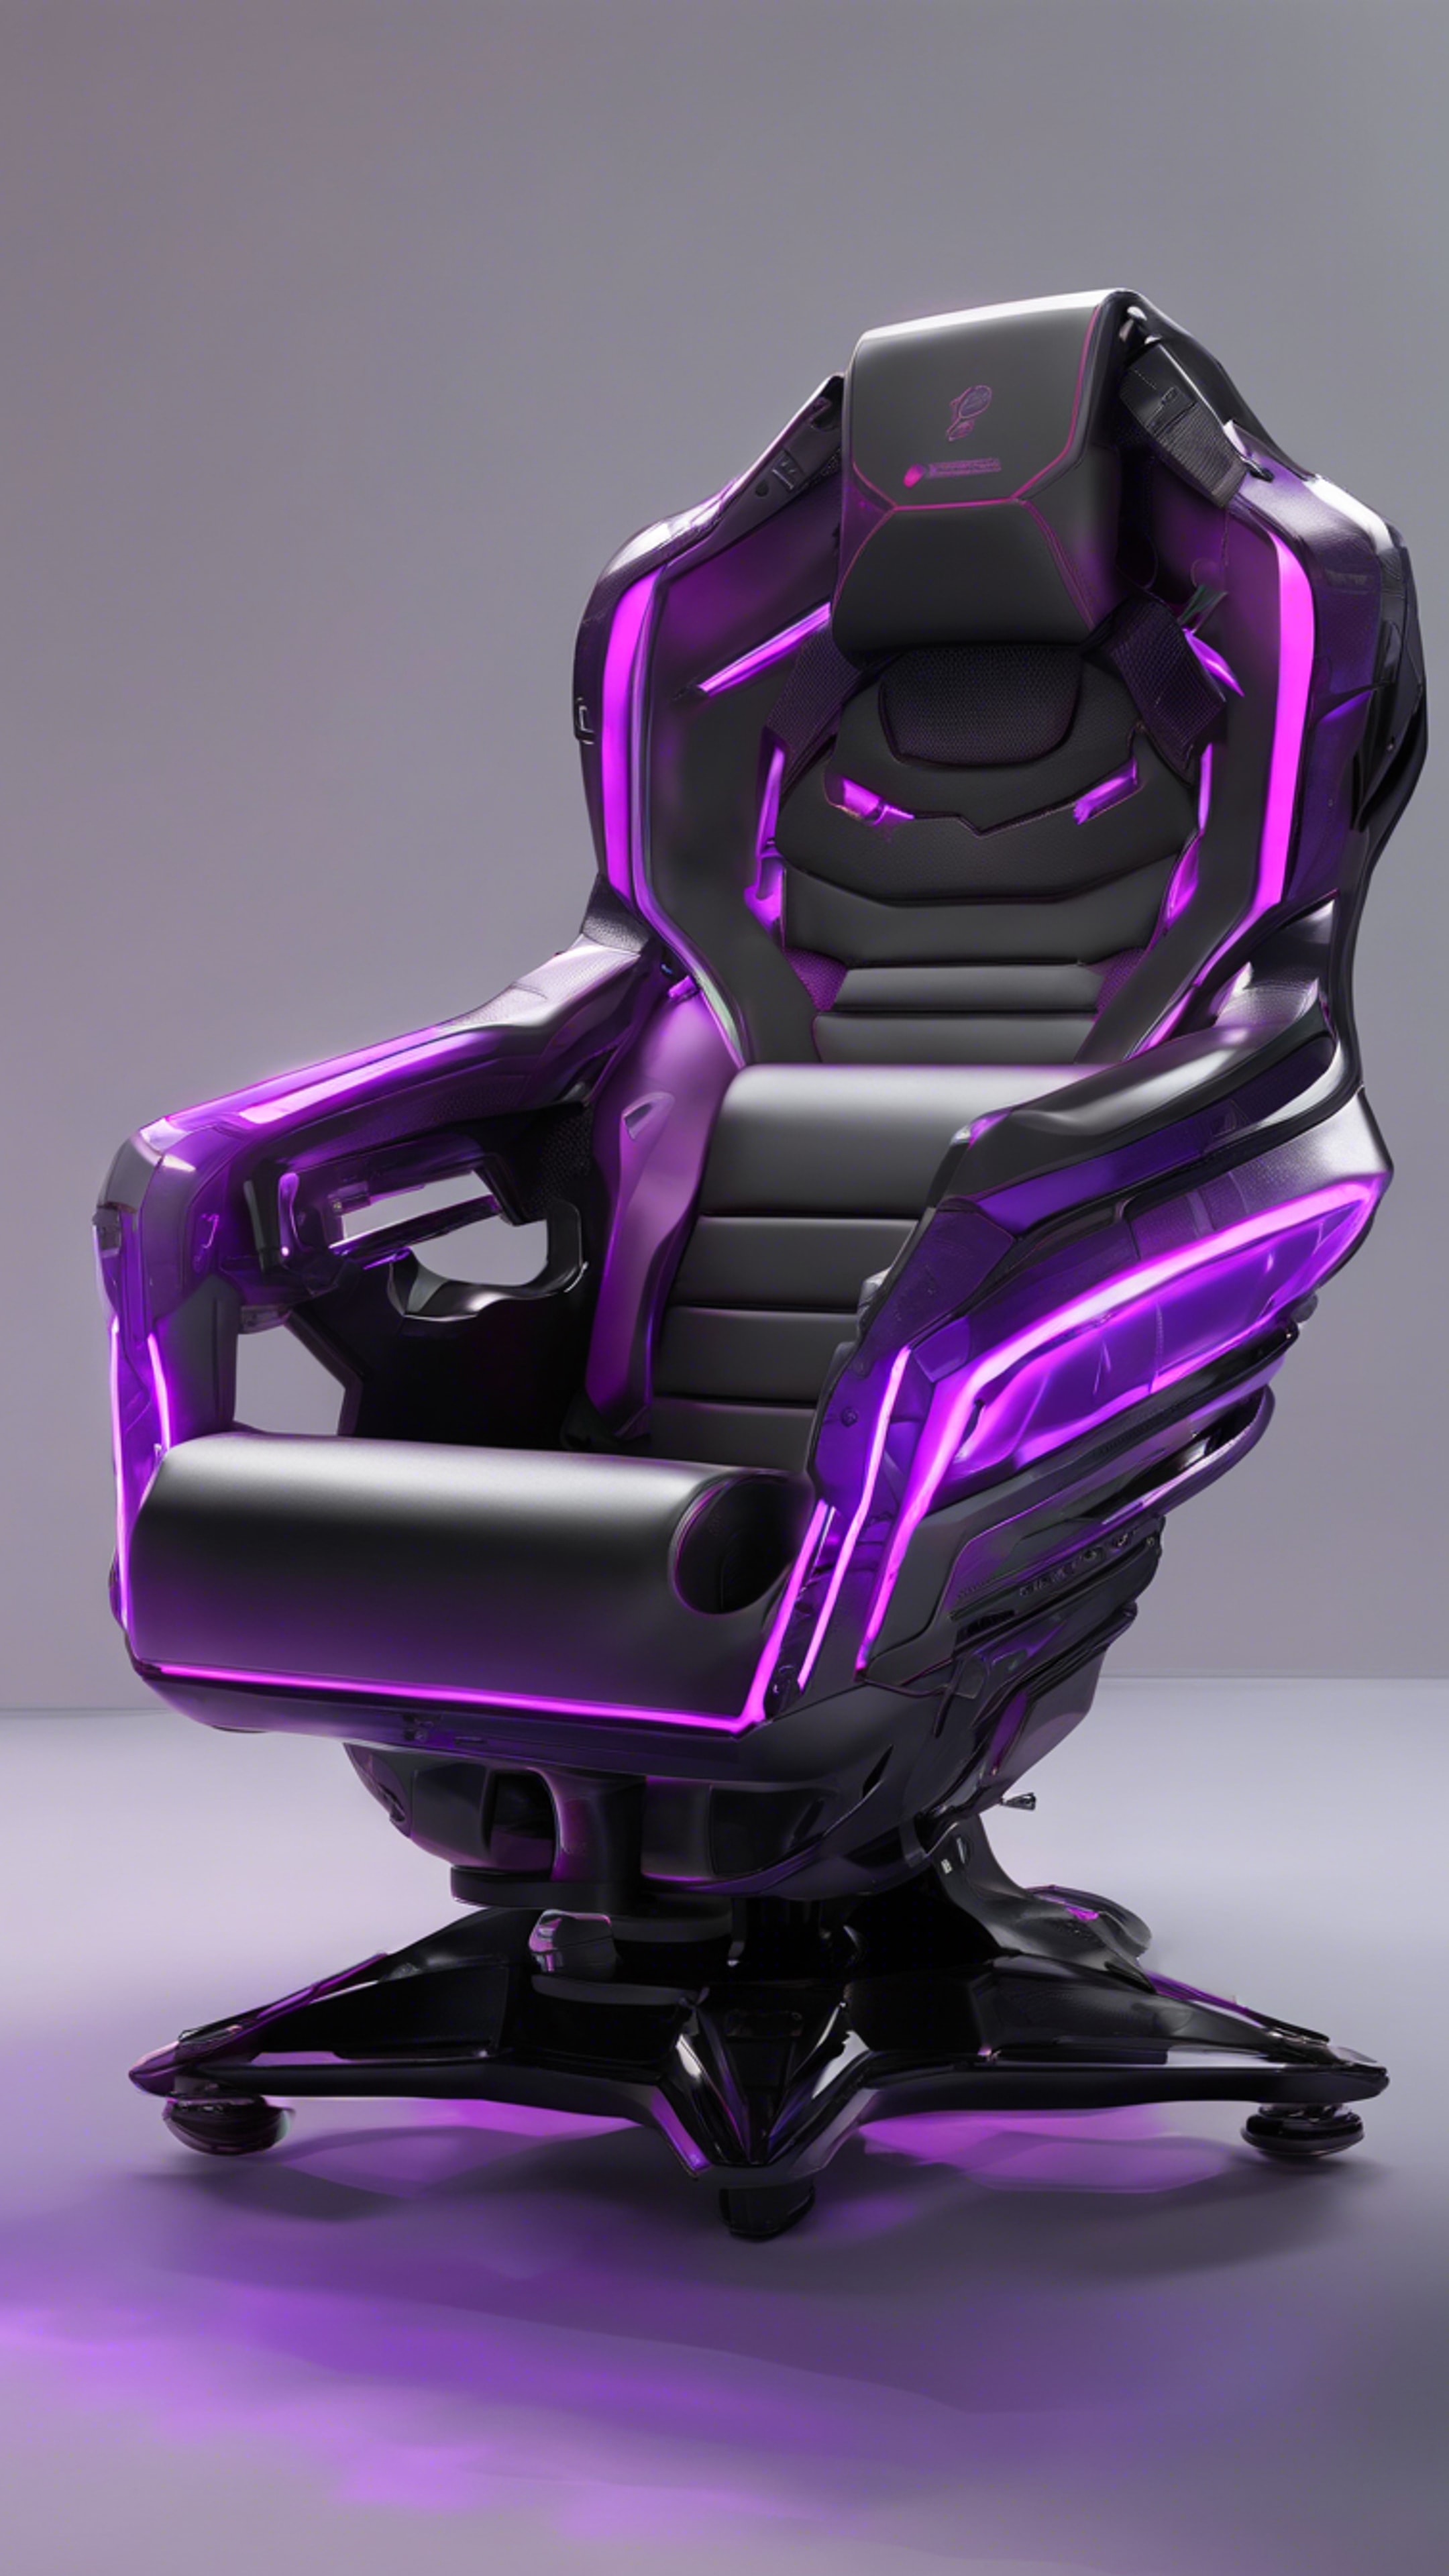 A futuristic gaming chair, jet black with neon purple accents, situated in a high-tech gaming station. duvar kağıdı[77c4183ef08040e08e97]